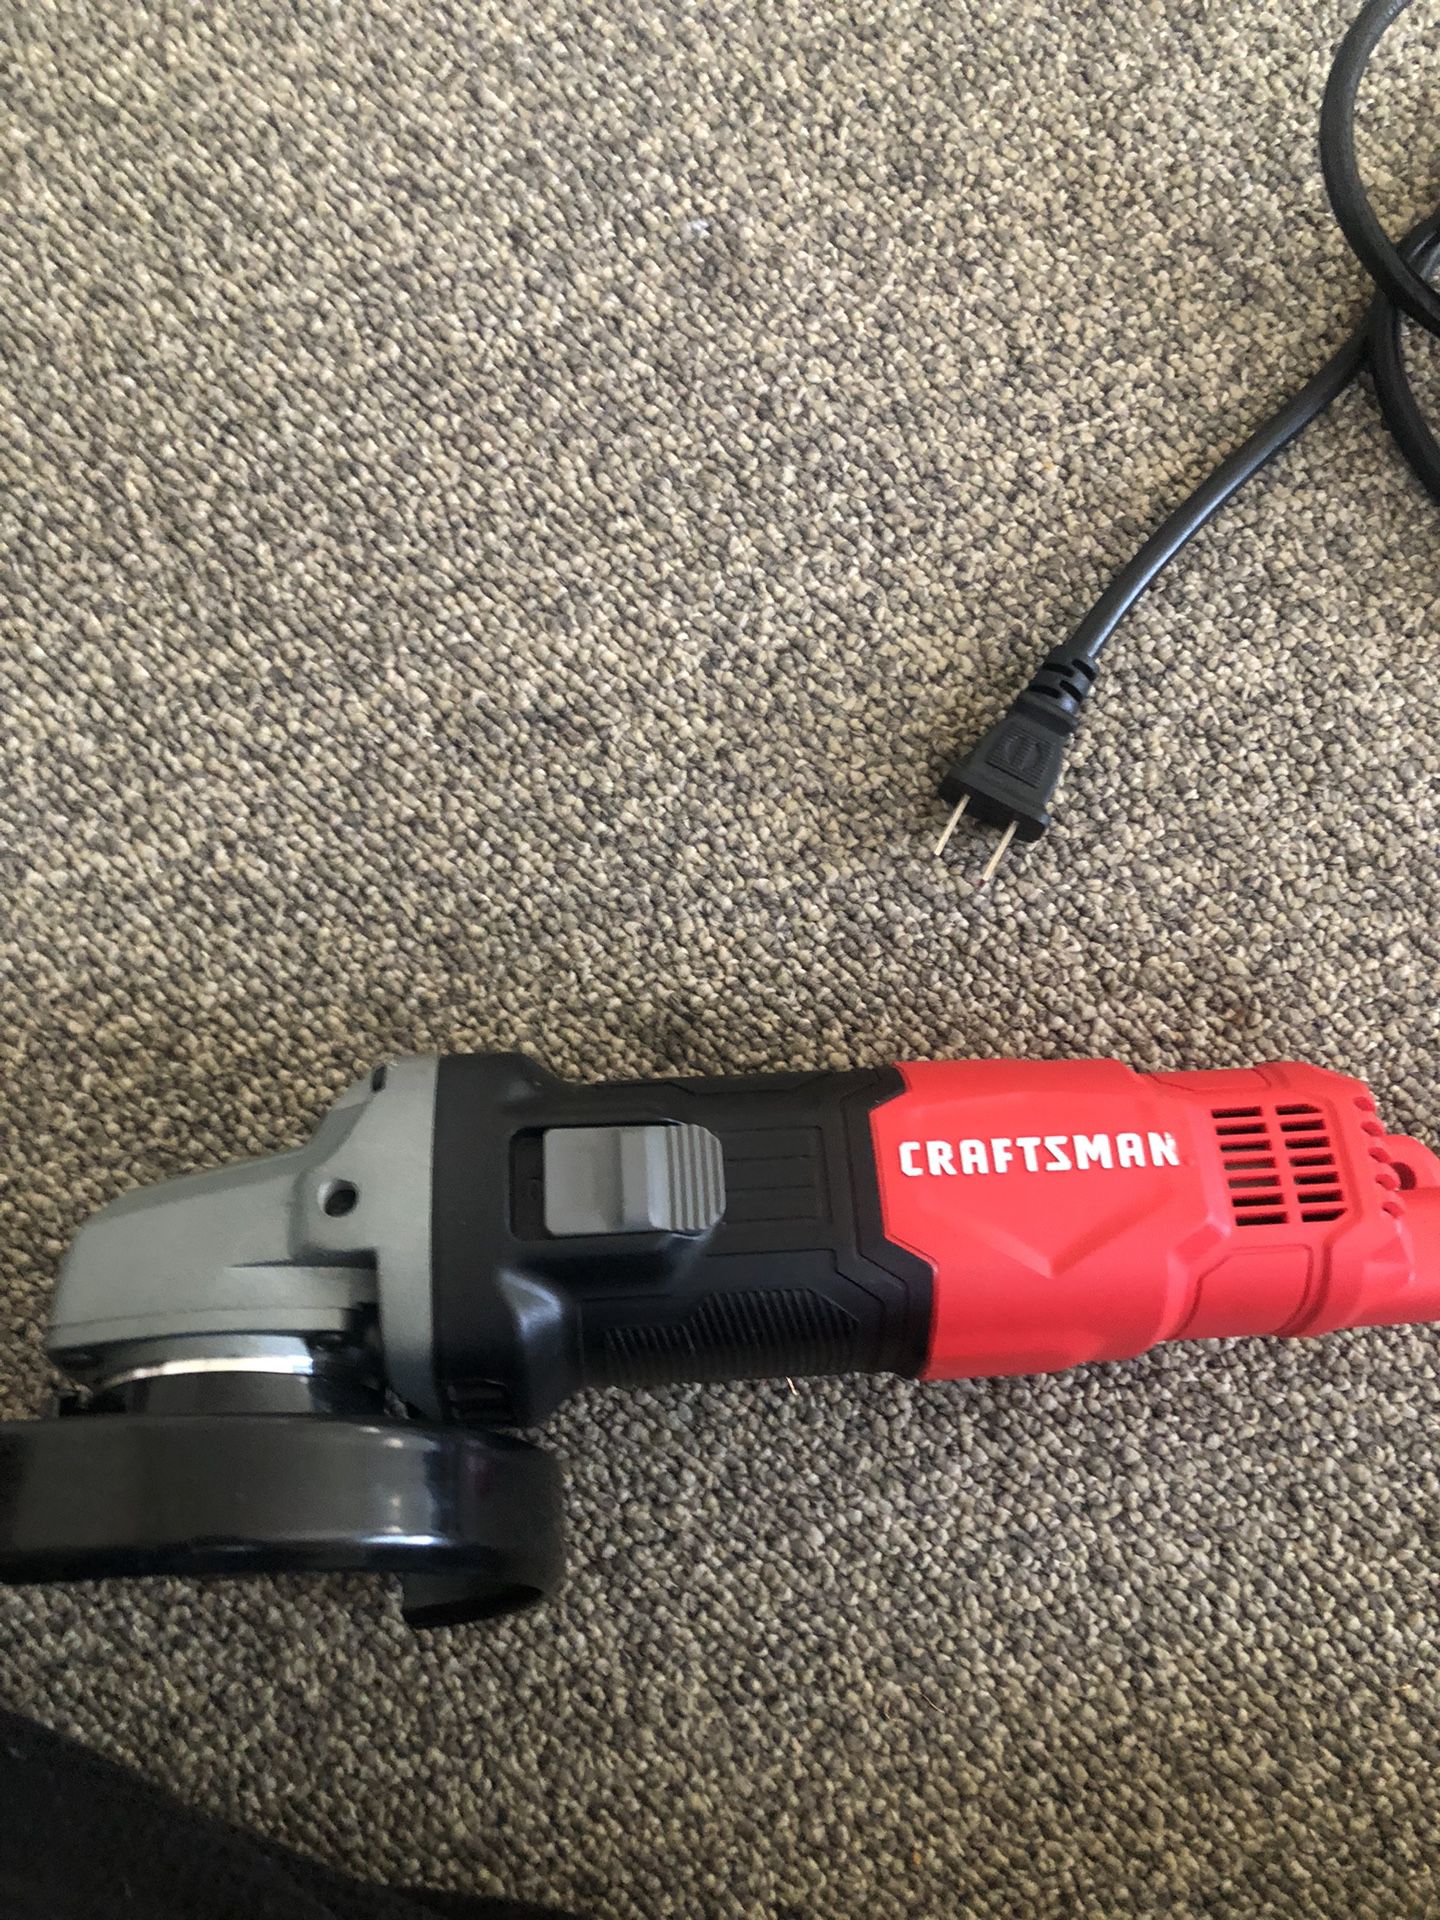 Craftsman Angle Grinder Like New Open Box Never Used 